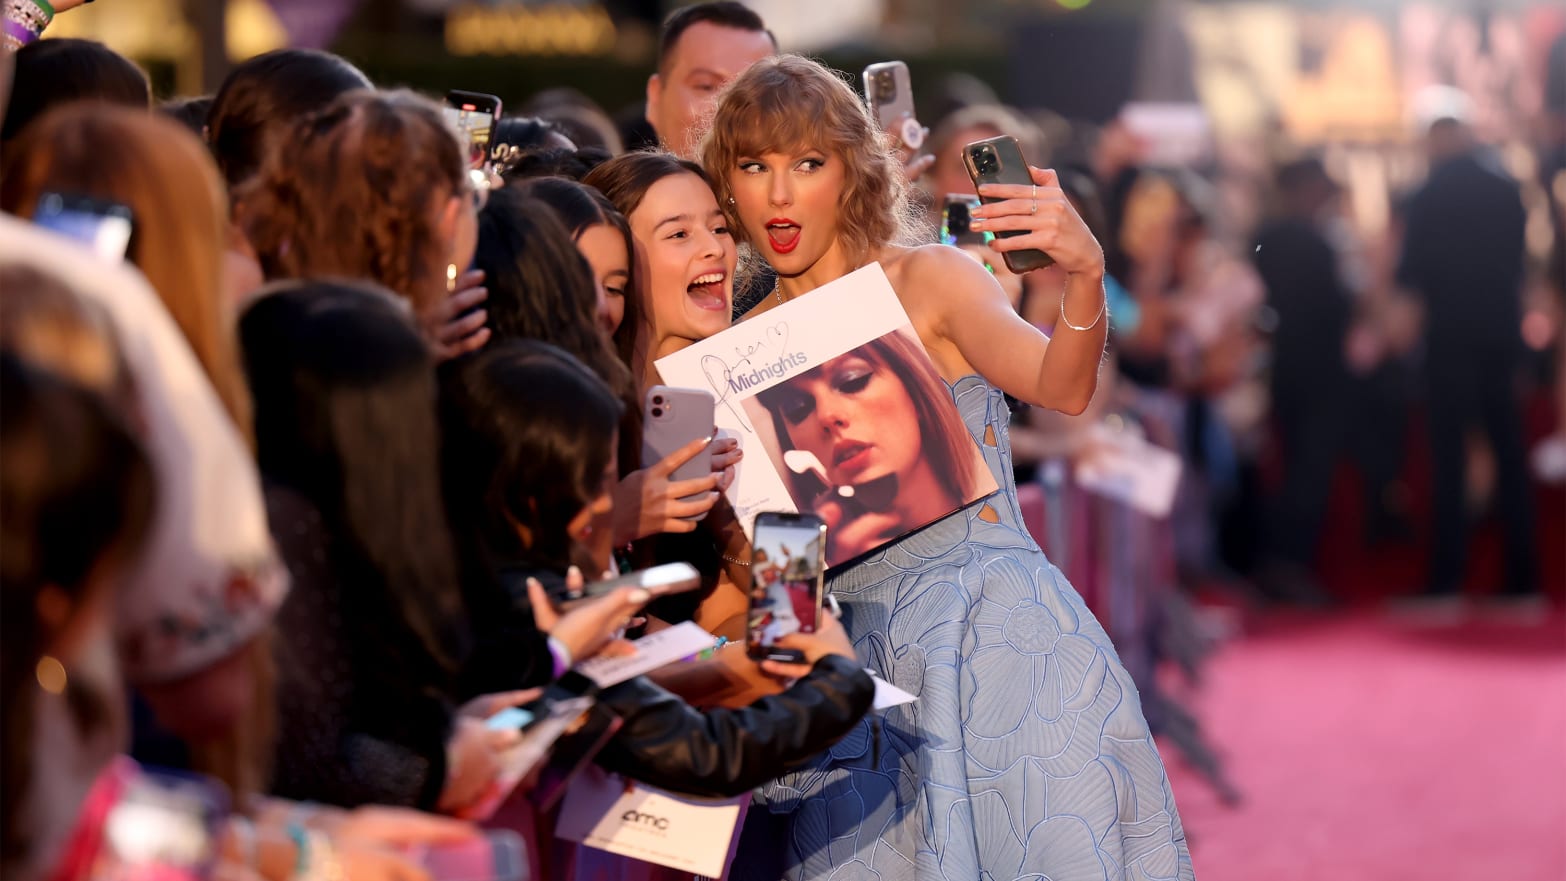 Taylor Swift attends the "Taylor Swift: The Eras Tour" Concert Movie World Premiere at AMC The Grove 14 in Los Angeles, California.